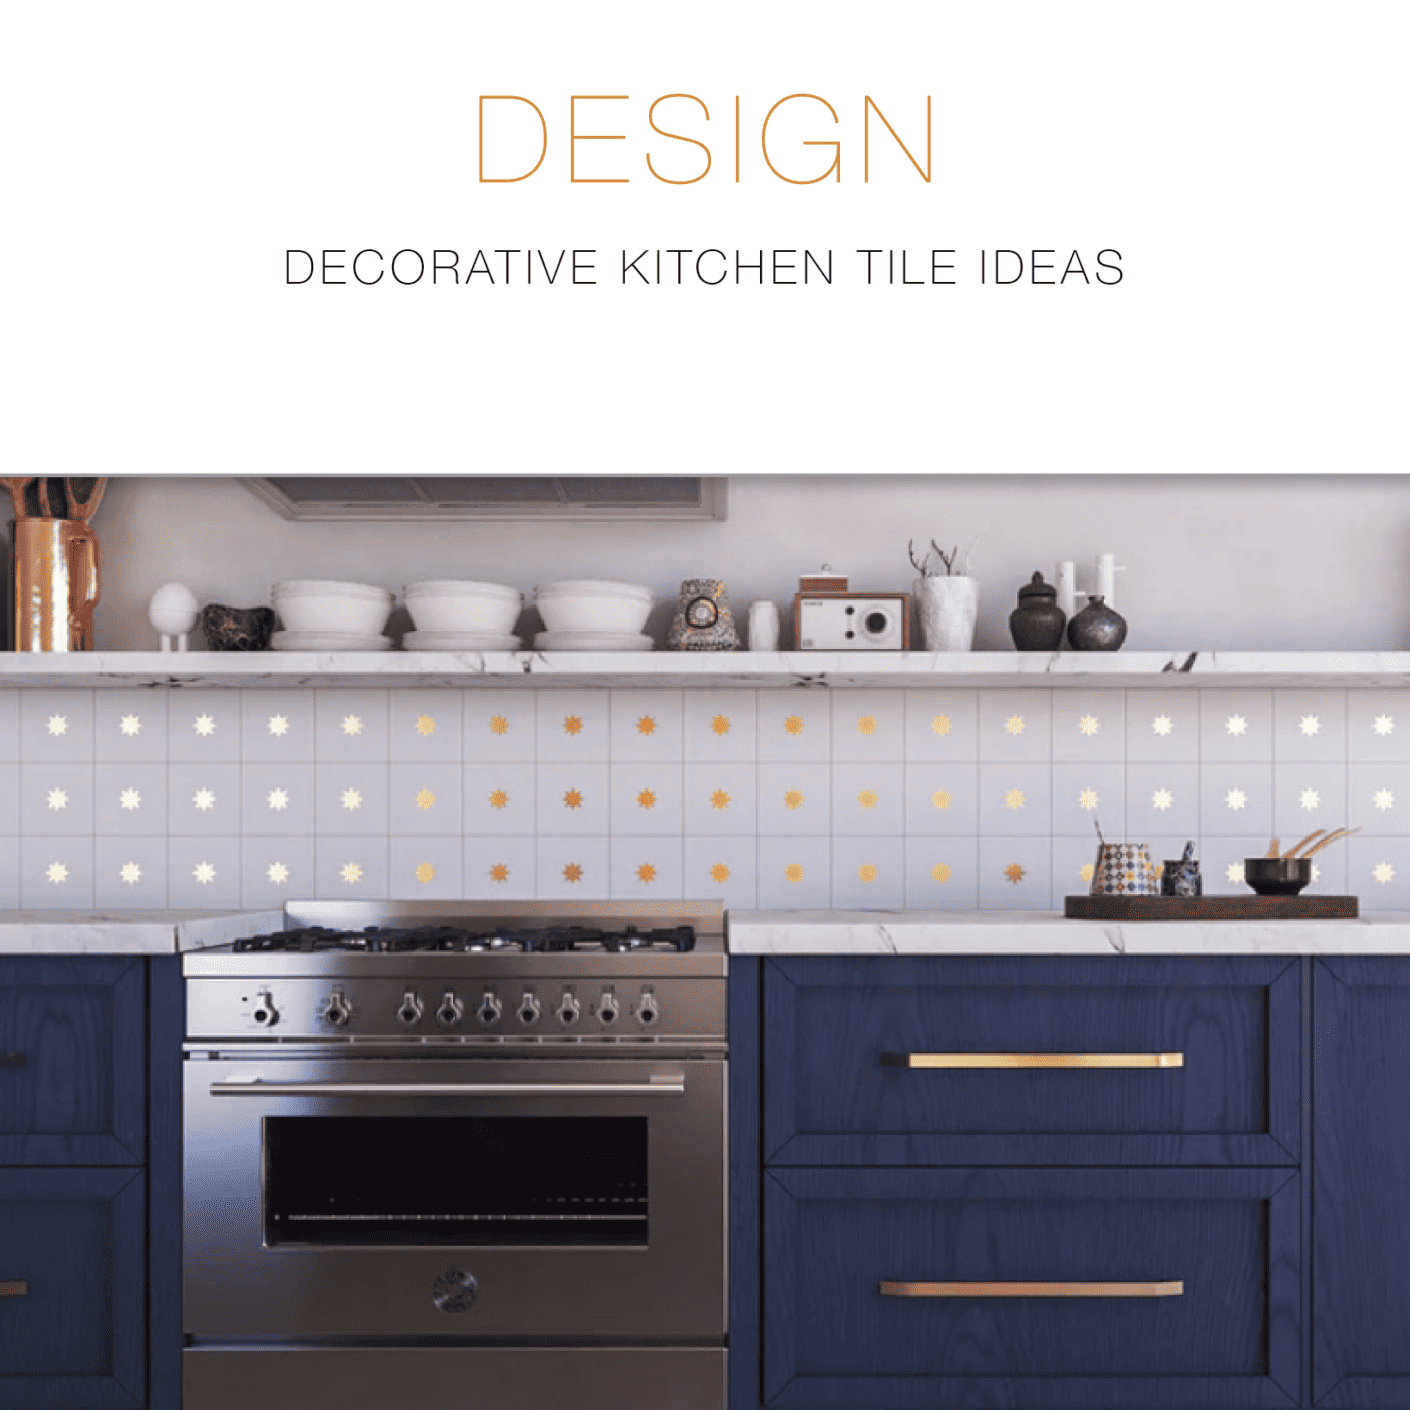 brass inlaid tile on kitchen backsplash with dark blue cabinets and open shelving